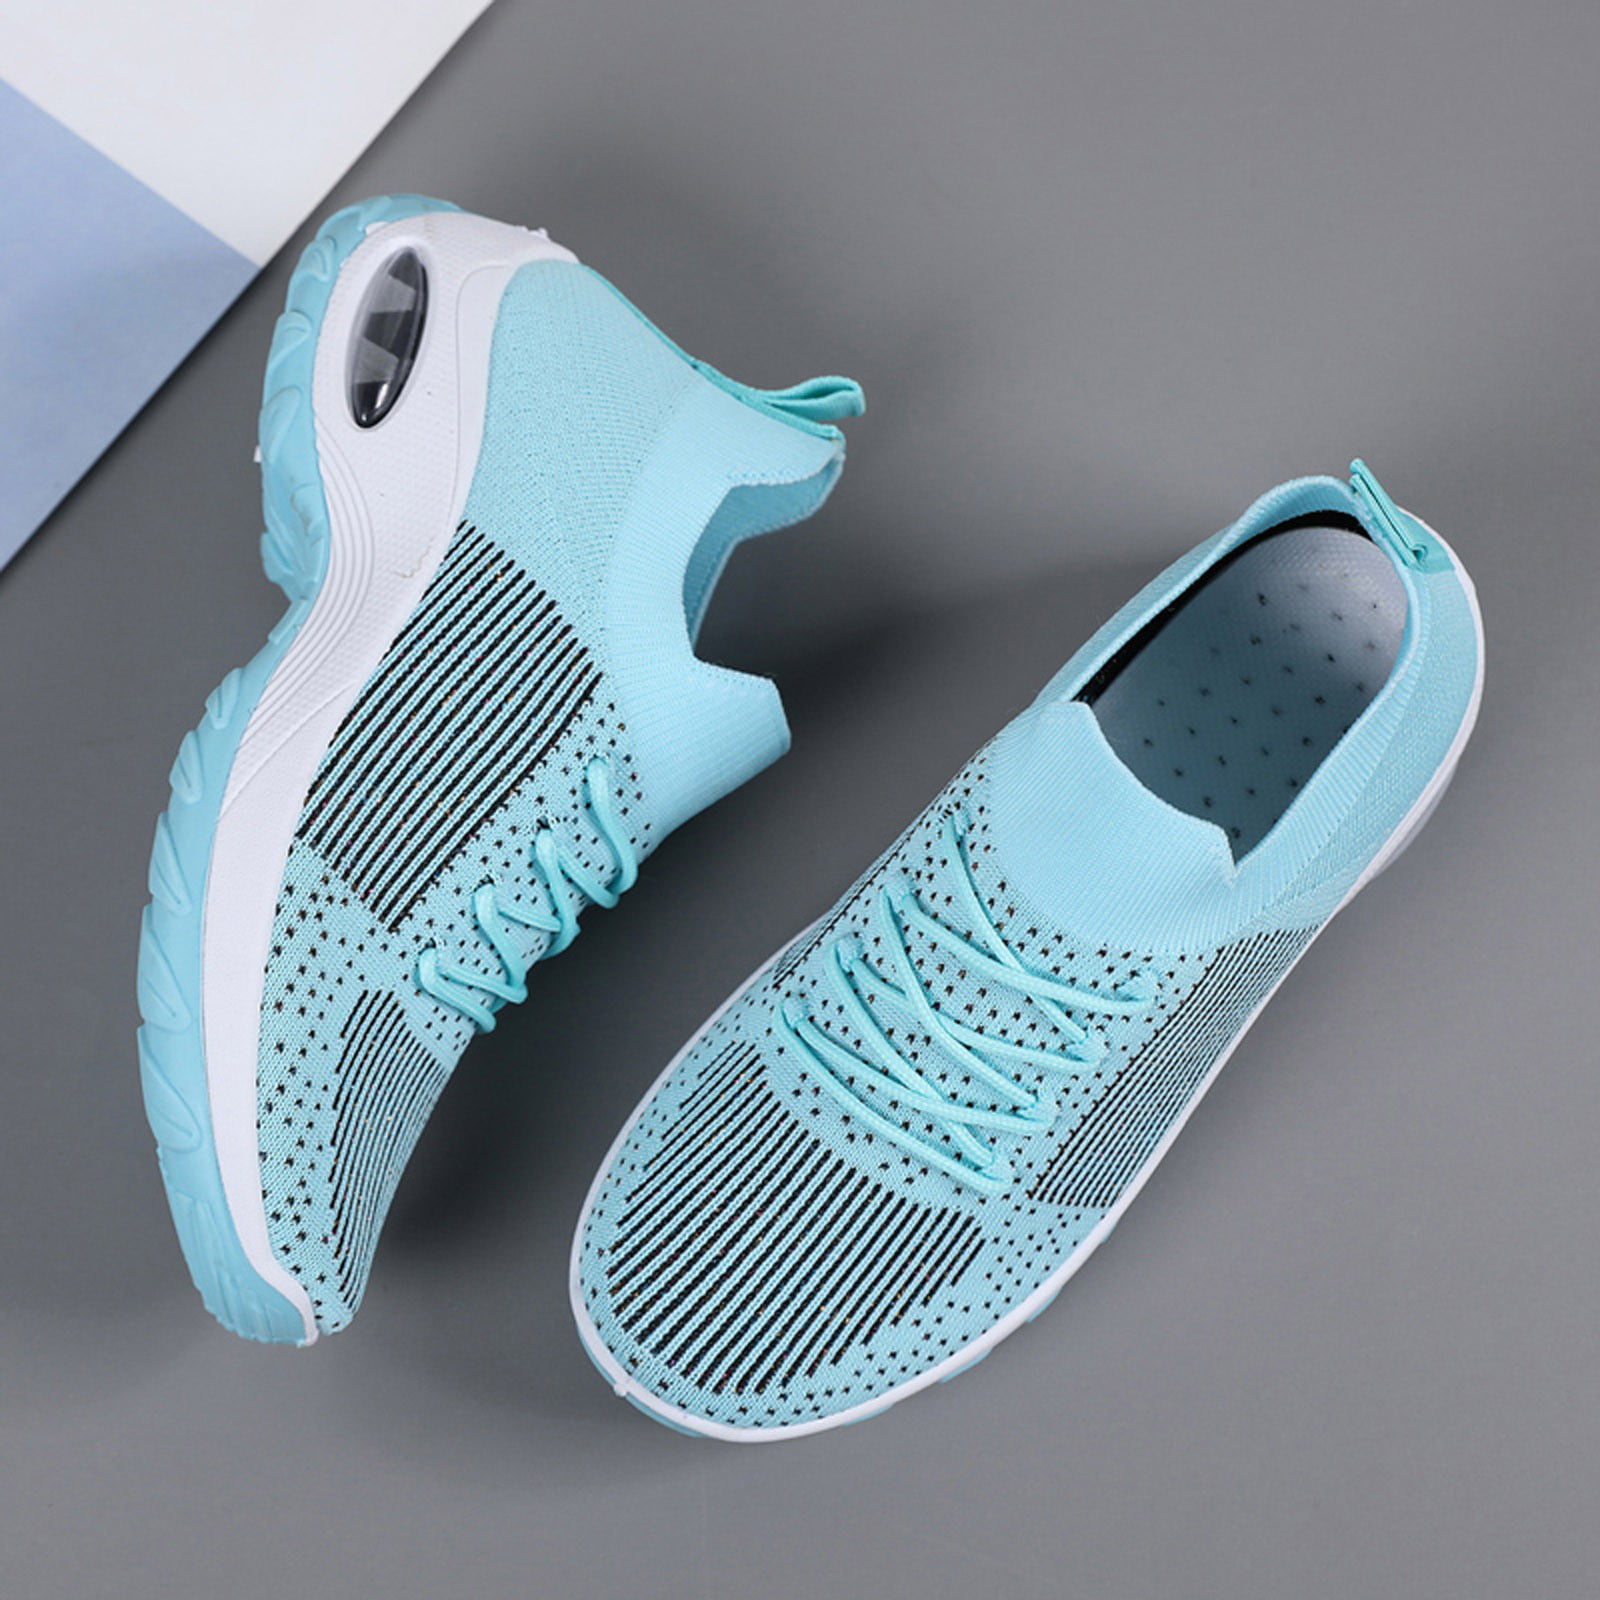 Leisure Women's Slip On Travel Sole Comfortable Shoes Outdoor Mesh Shoes Runing Fashion Sports Breathable Sneakers Sneakers for Women Foam Slip on Women Sneakers Wide Women's Sneakers Size - Walmart.com